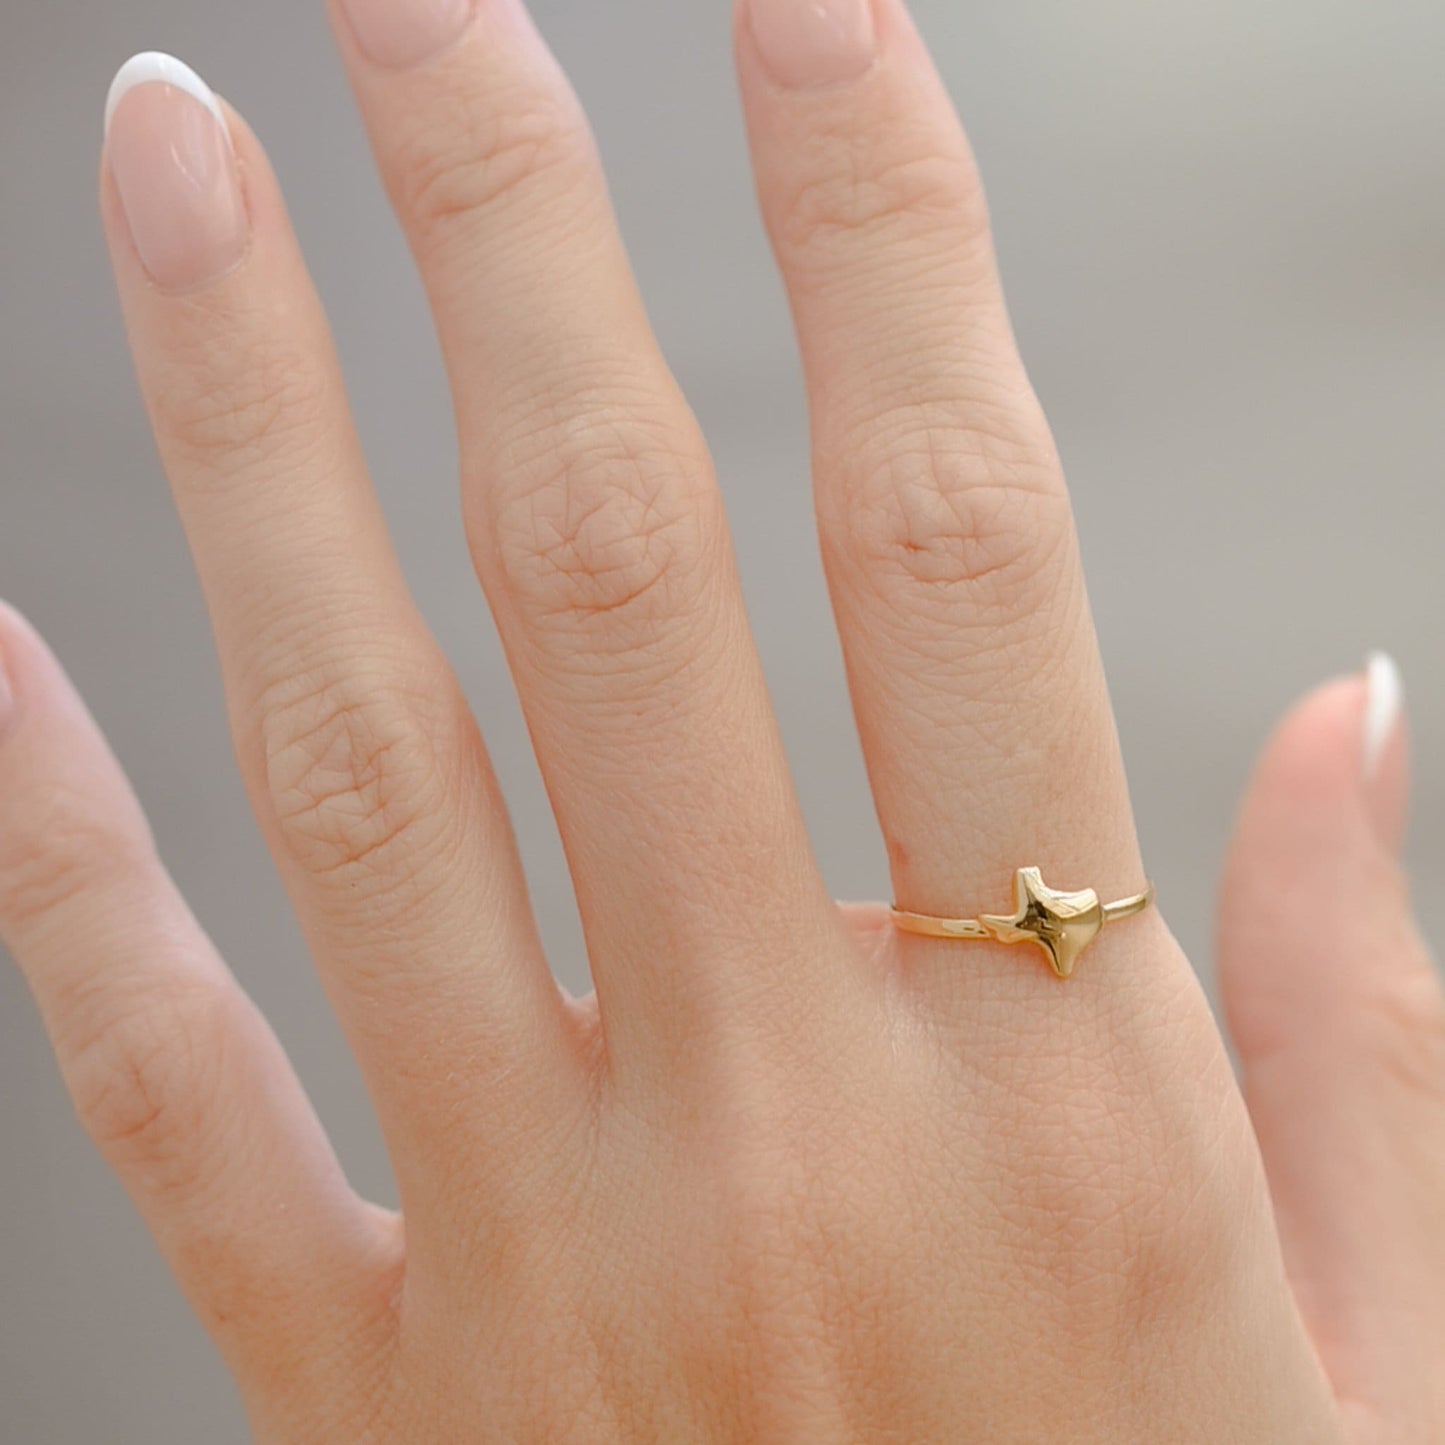 Texas Gal's Delight: Dainty Minimalist Texas Ring - Perfect Gift for Her or University of Texas (UT) Fan